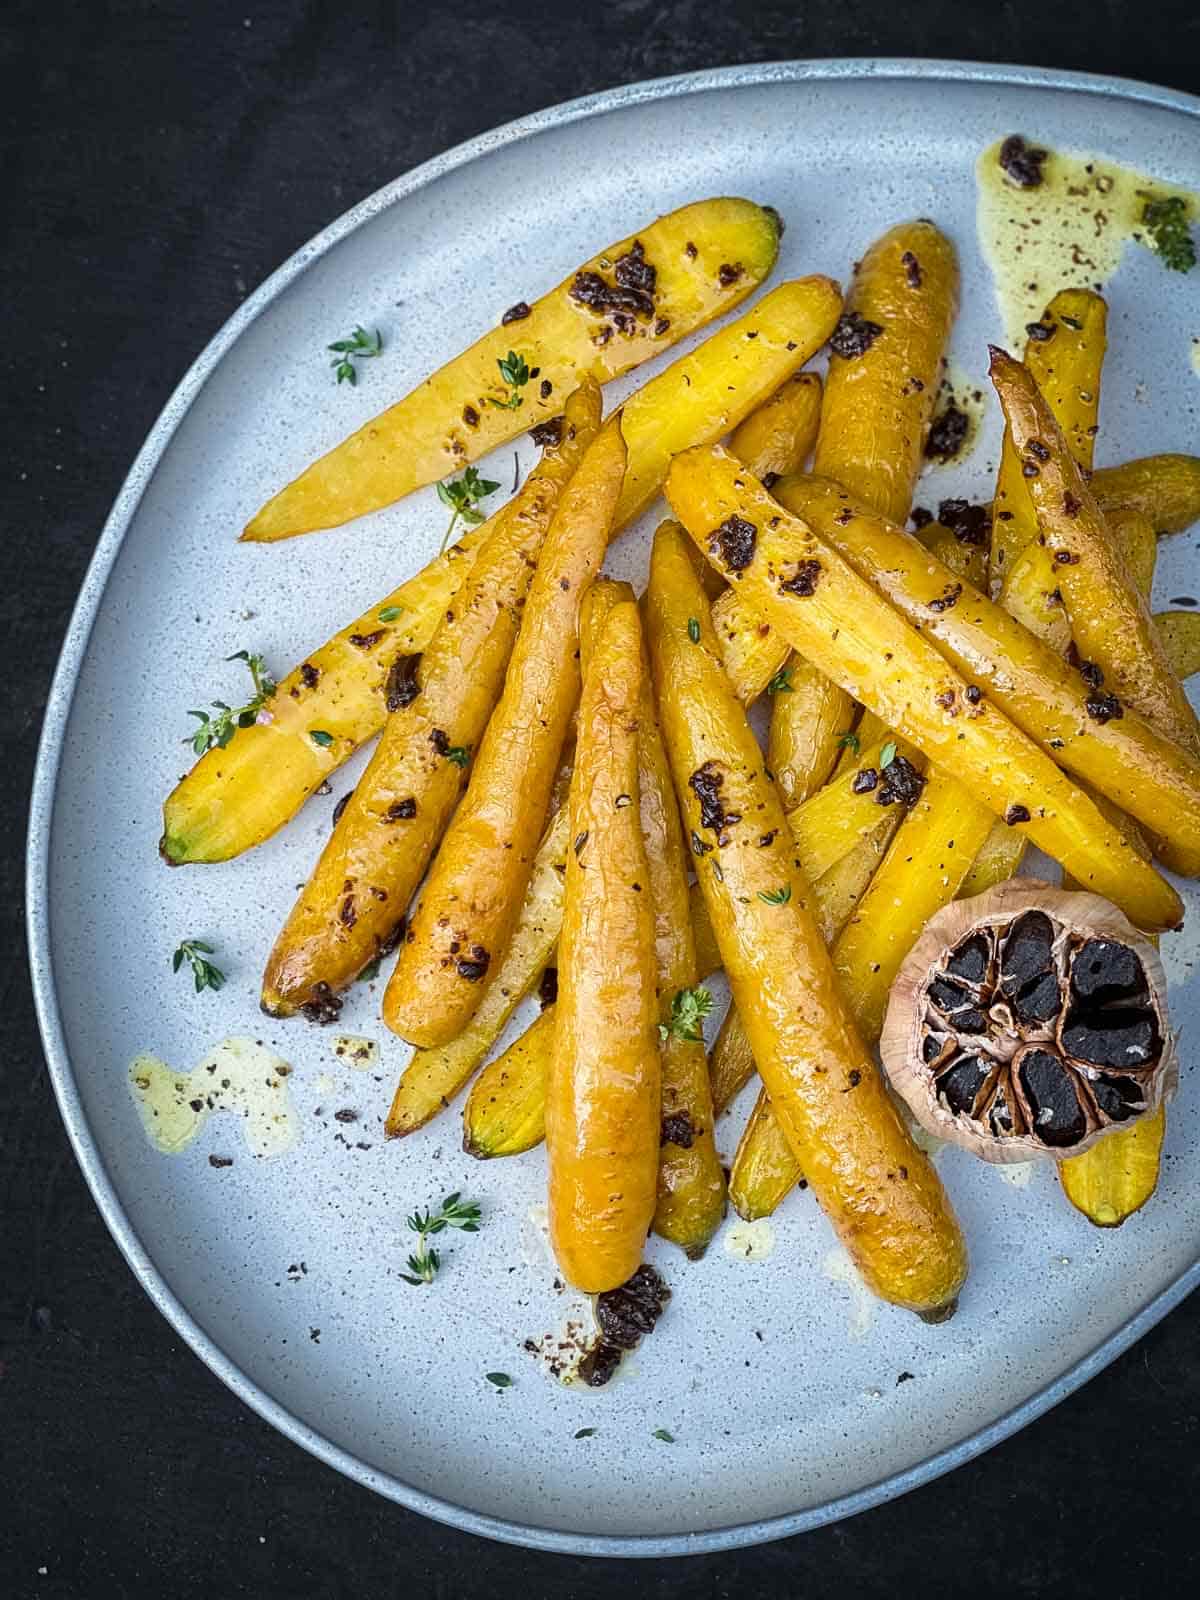 Roasted yellow carrots and black garlic on a blue salad platter